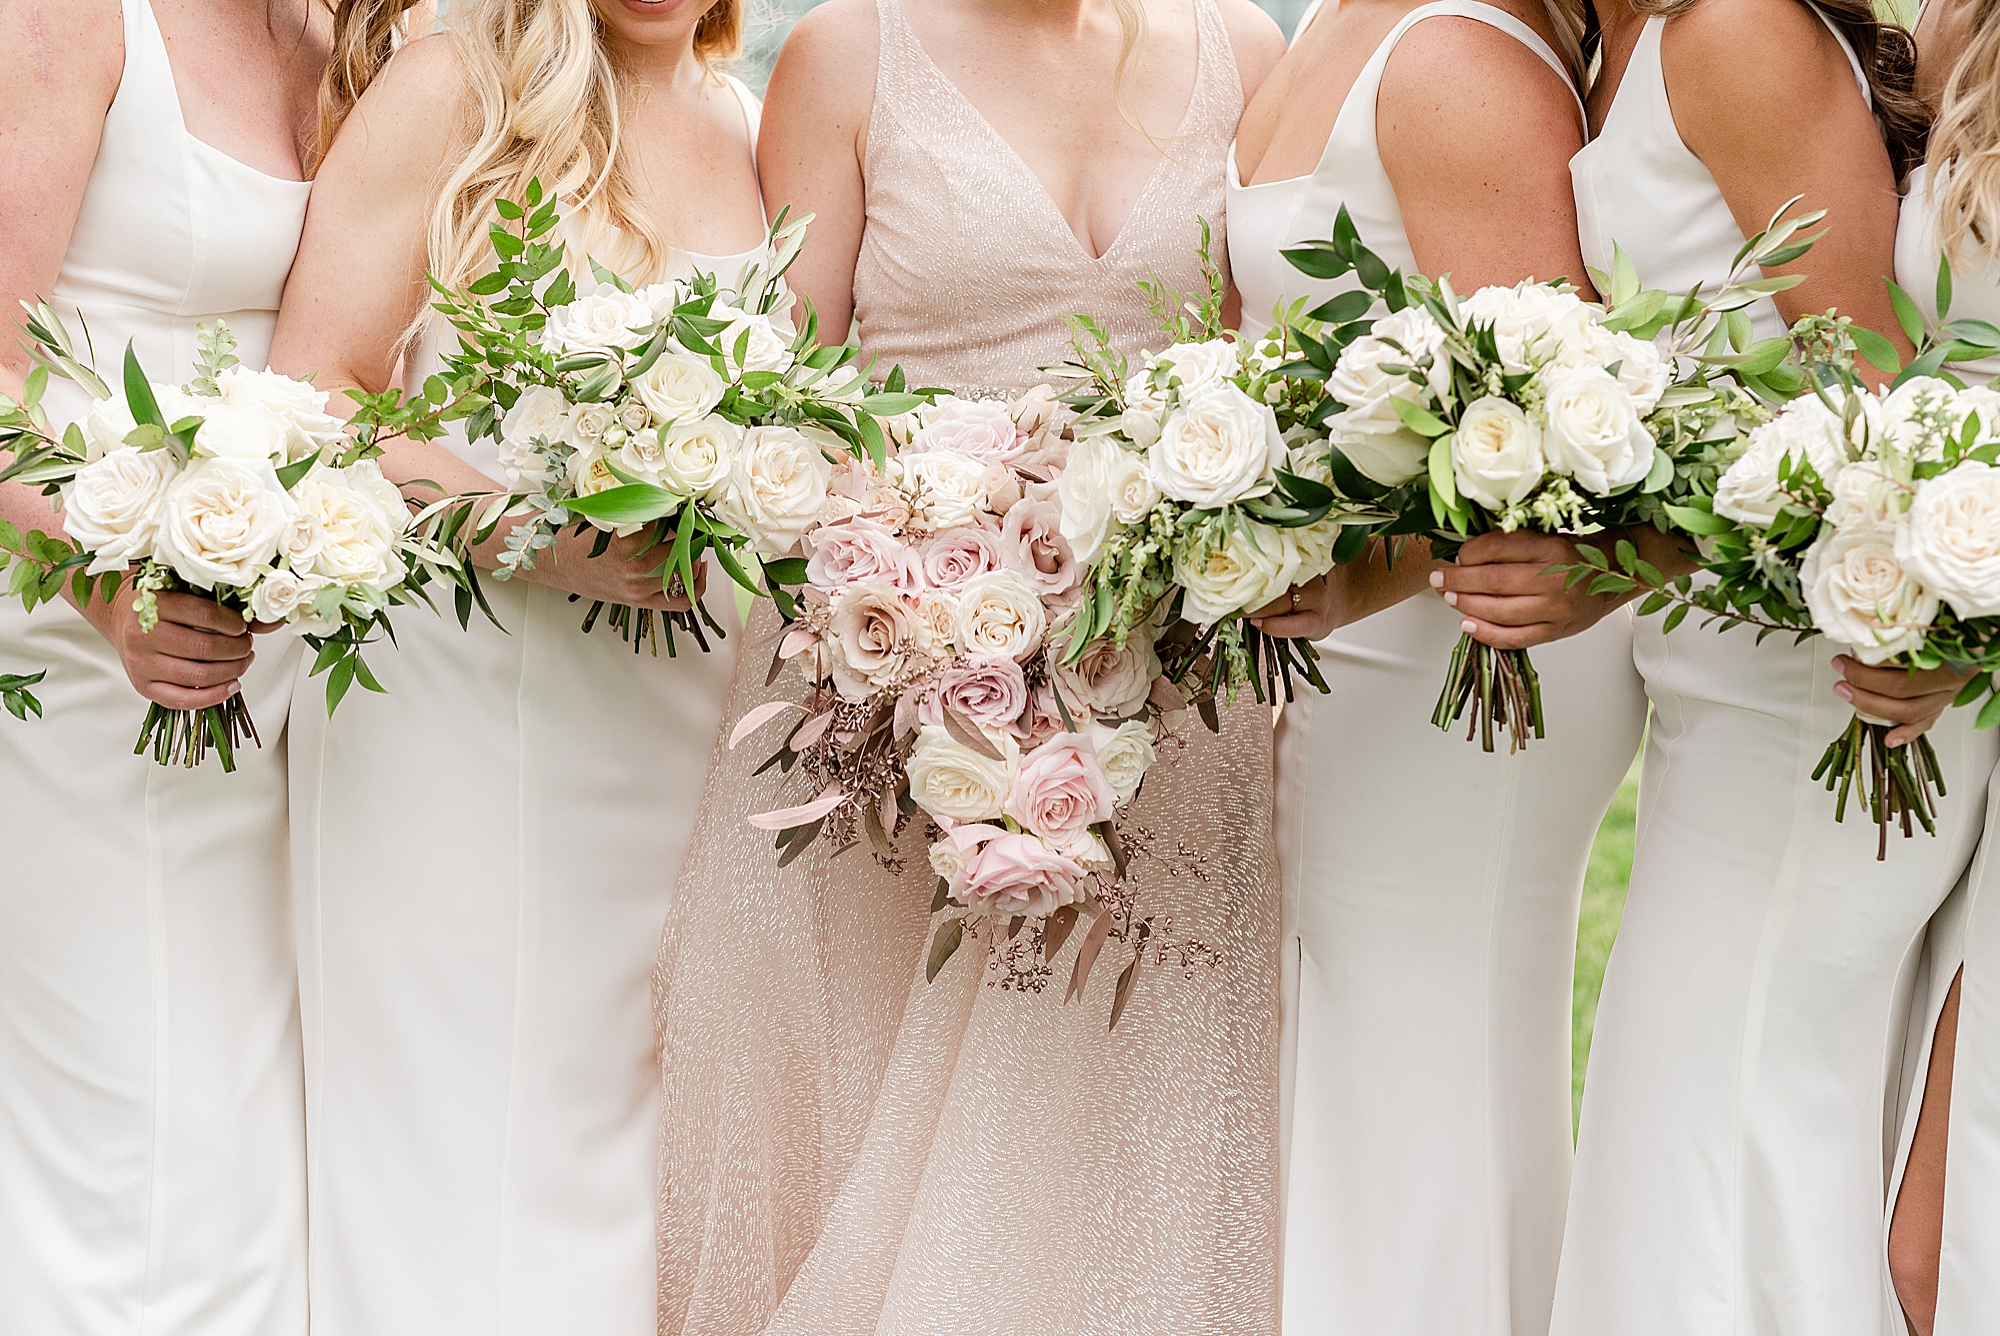 all-white bouquets for bridesmaids and bride